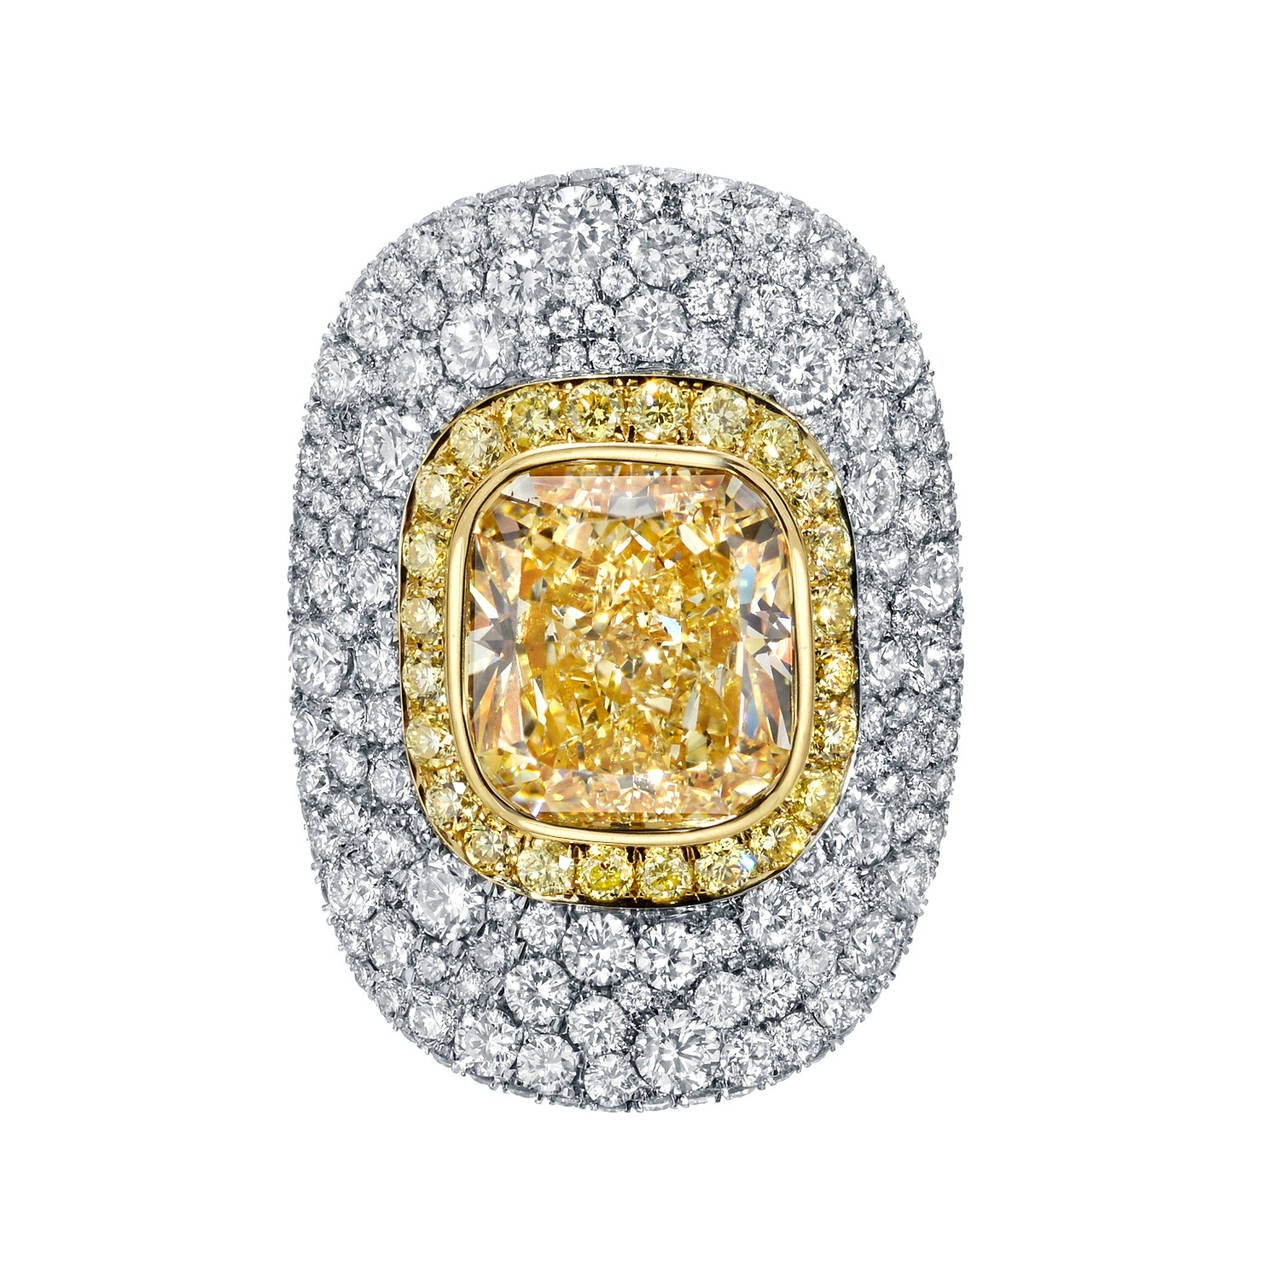 A magnificent 5.30ct, VS2, cushion, light yellow diamond, is surrounded by fancy yellow diamonds totaling 0.51ct, and 